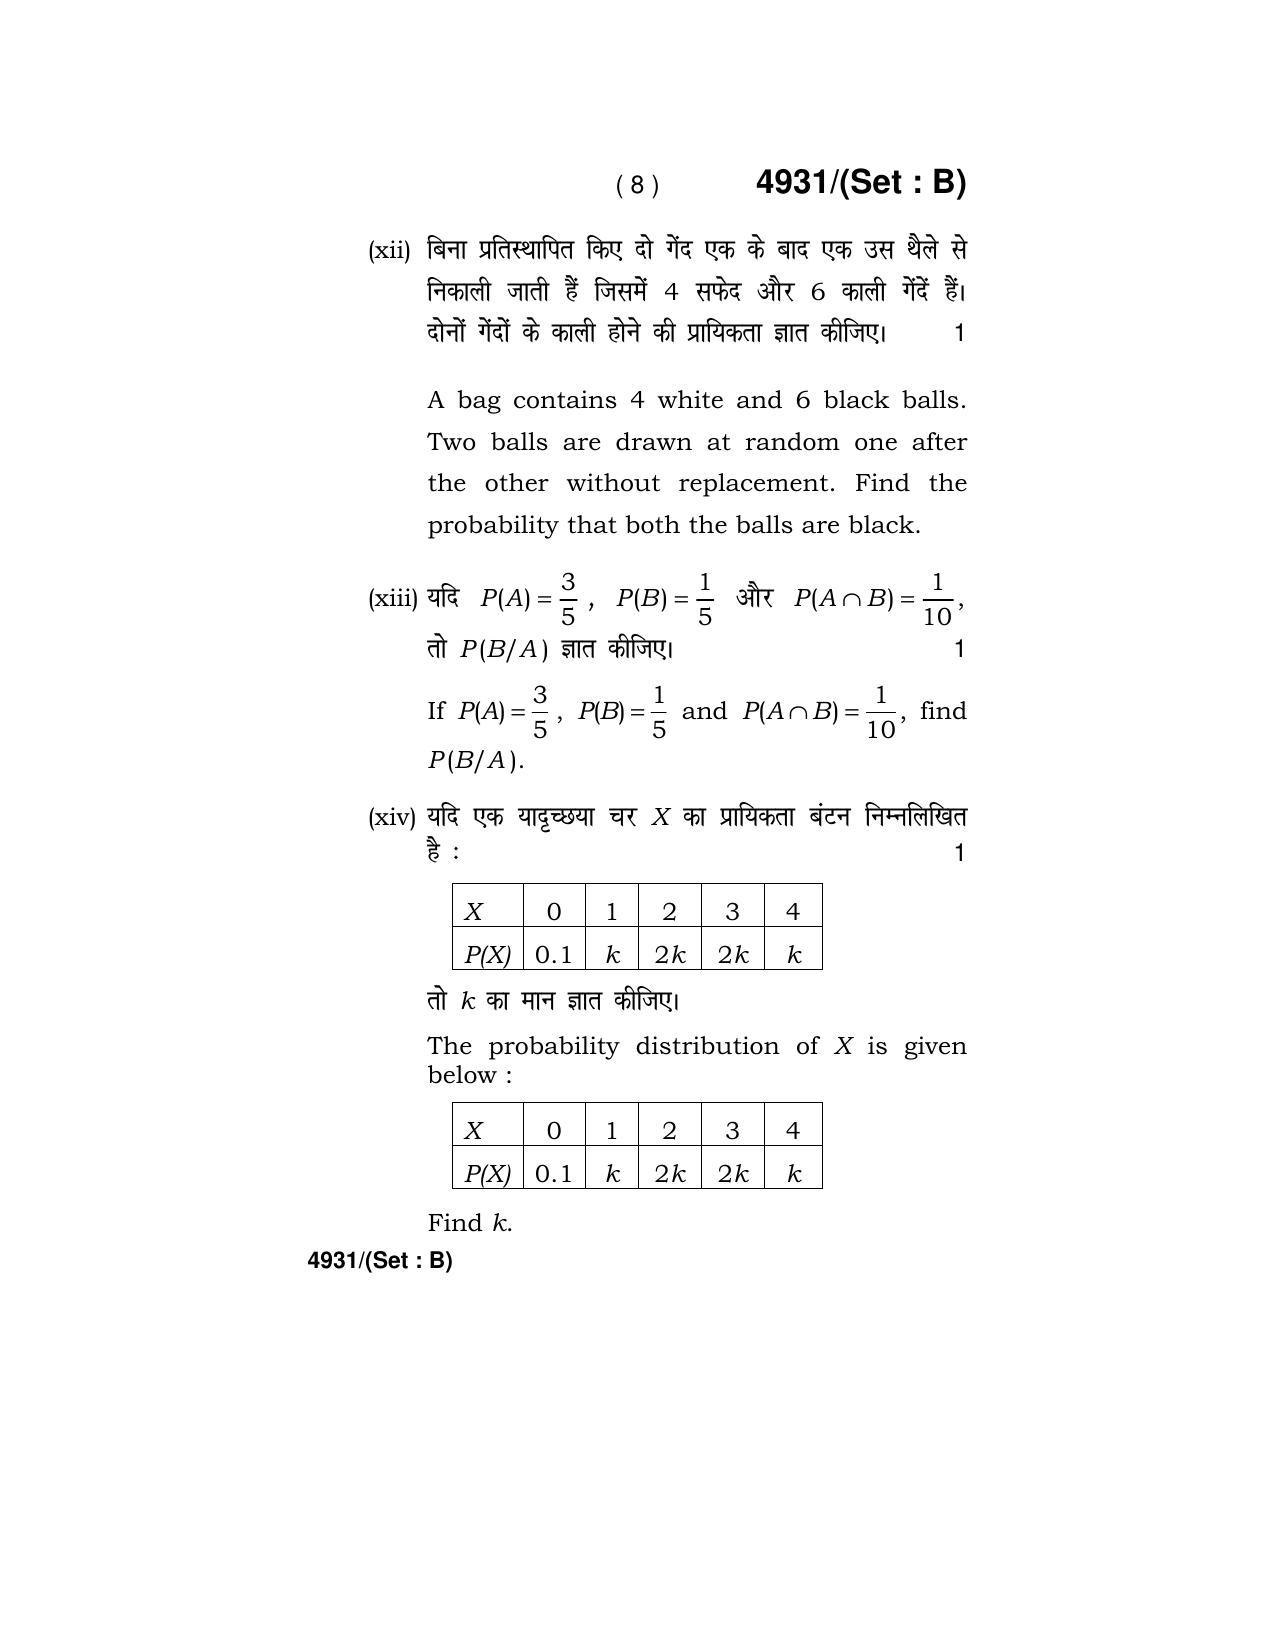 Haryana Board HBSE Class 12 Mathematics 2020 Question Paper - Page 24